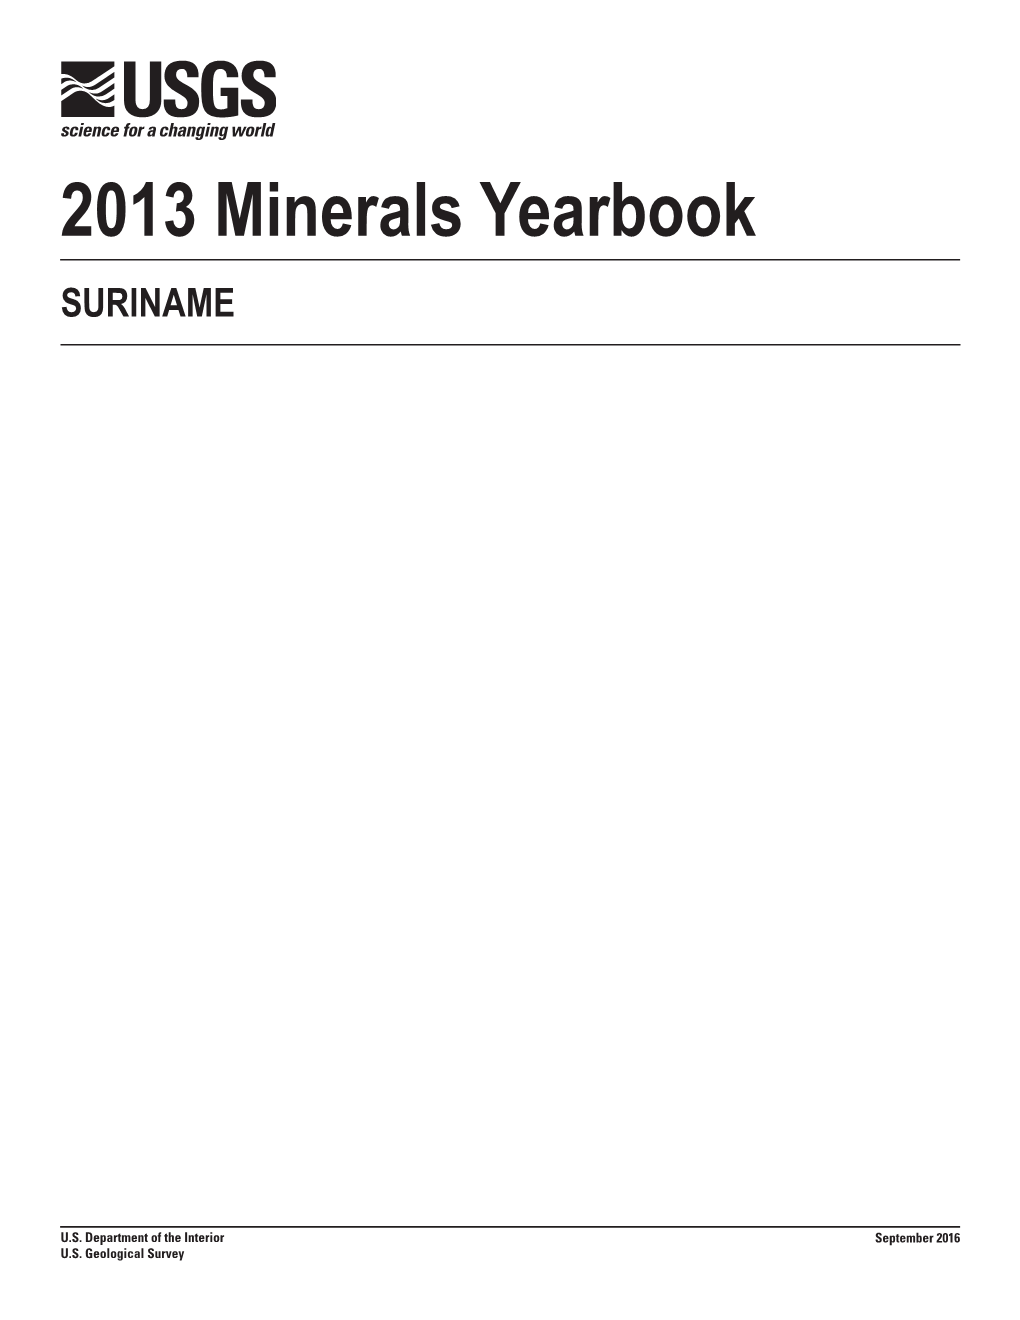 The Mineral Industry of Suriname in 2013